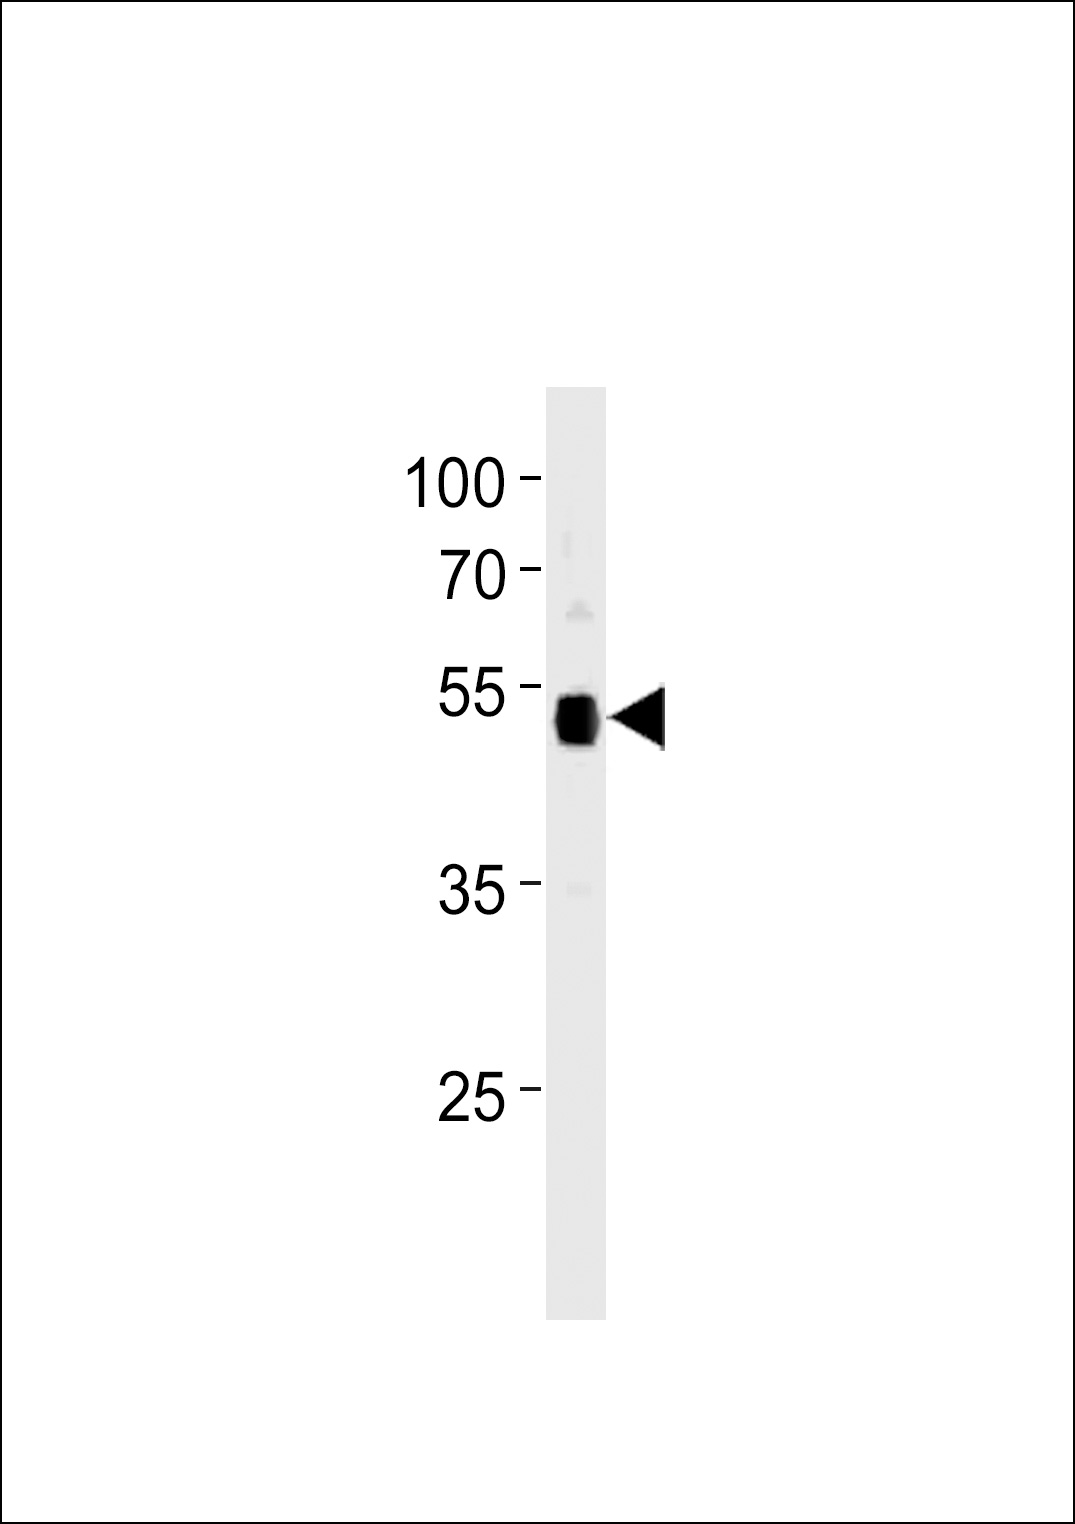 TP53 Antibody (C-term) (Cat. #AP2505b) western blot analysis in 293 cell line lysates (35ug/lane).This demonstrates the TP53 antibody detected the TP53 protein (arrow).